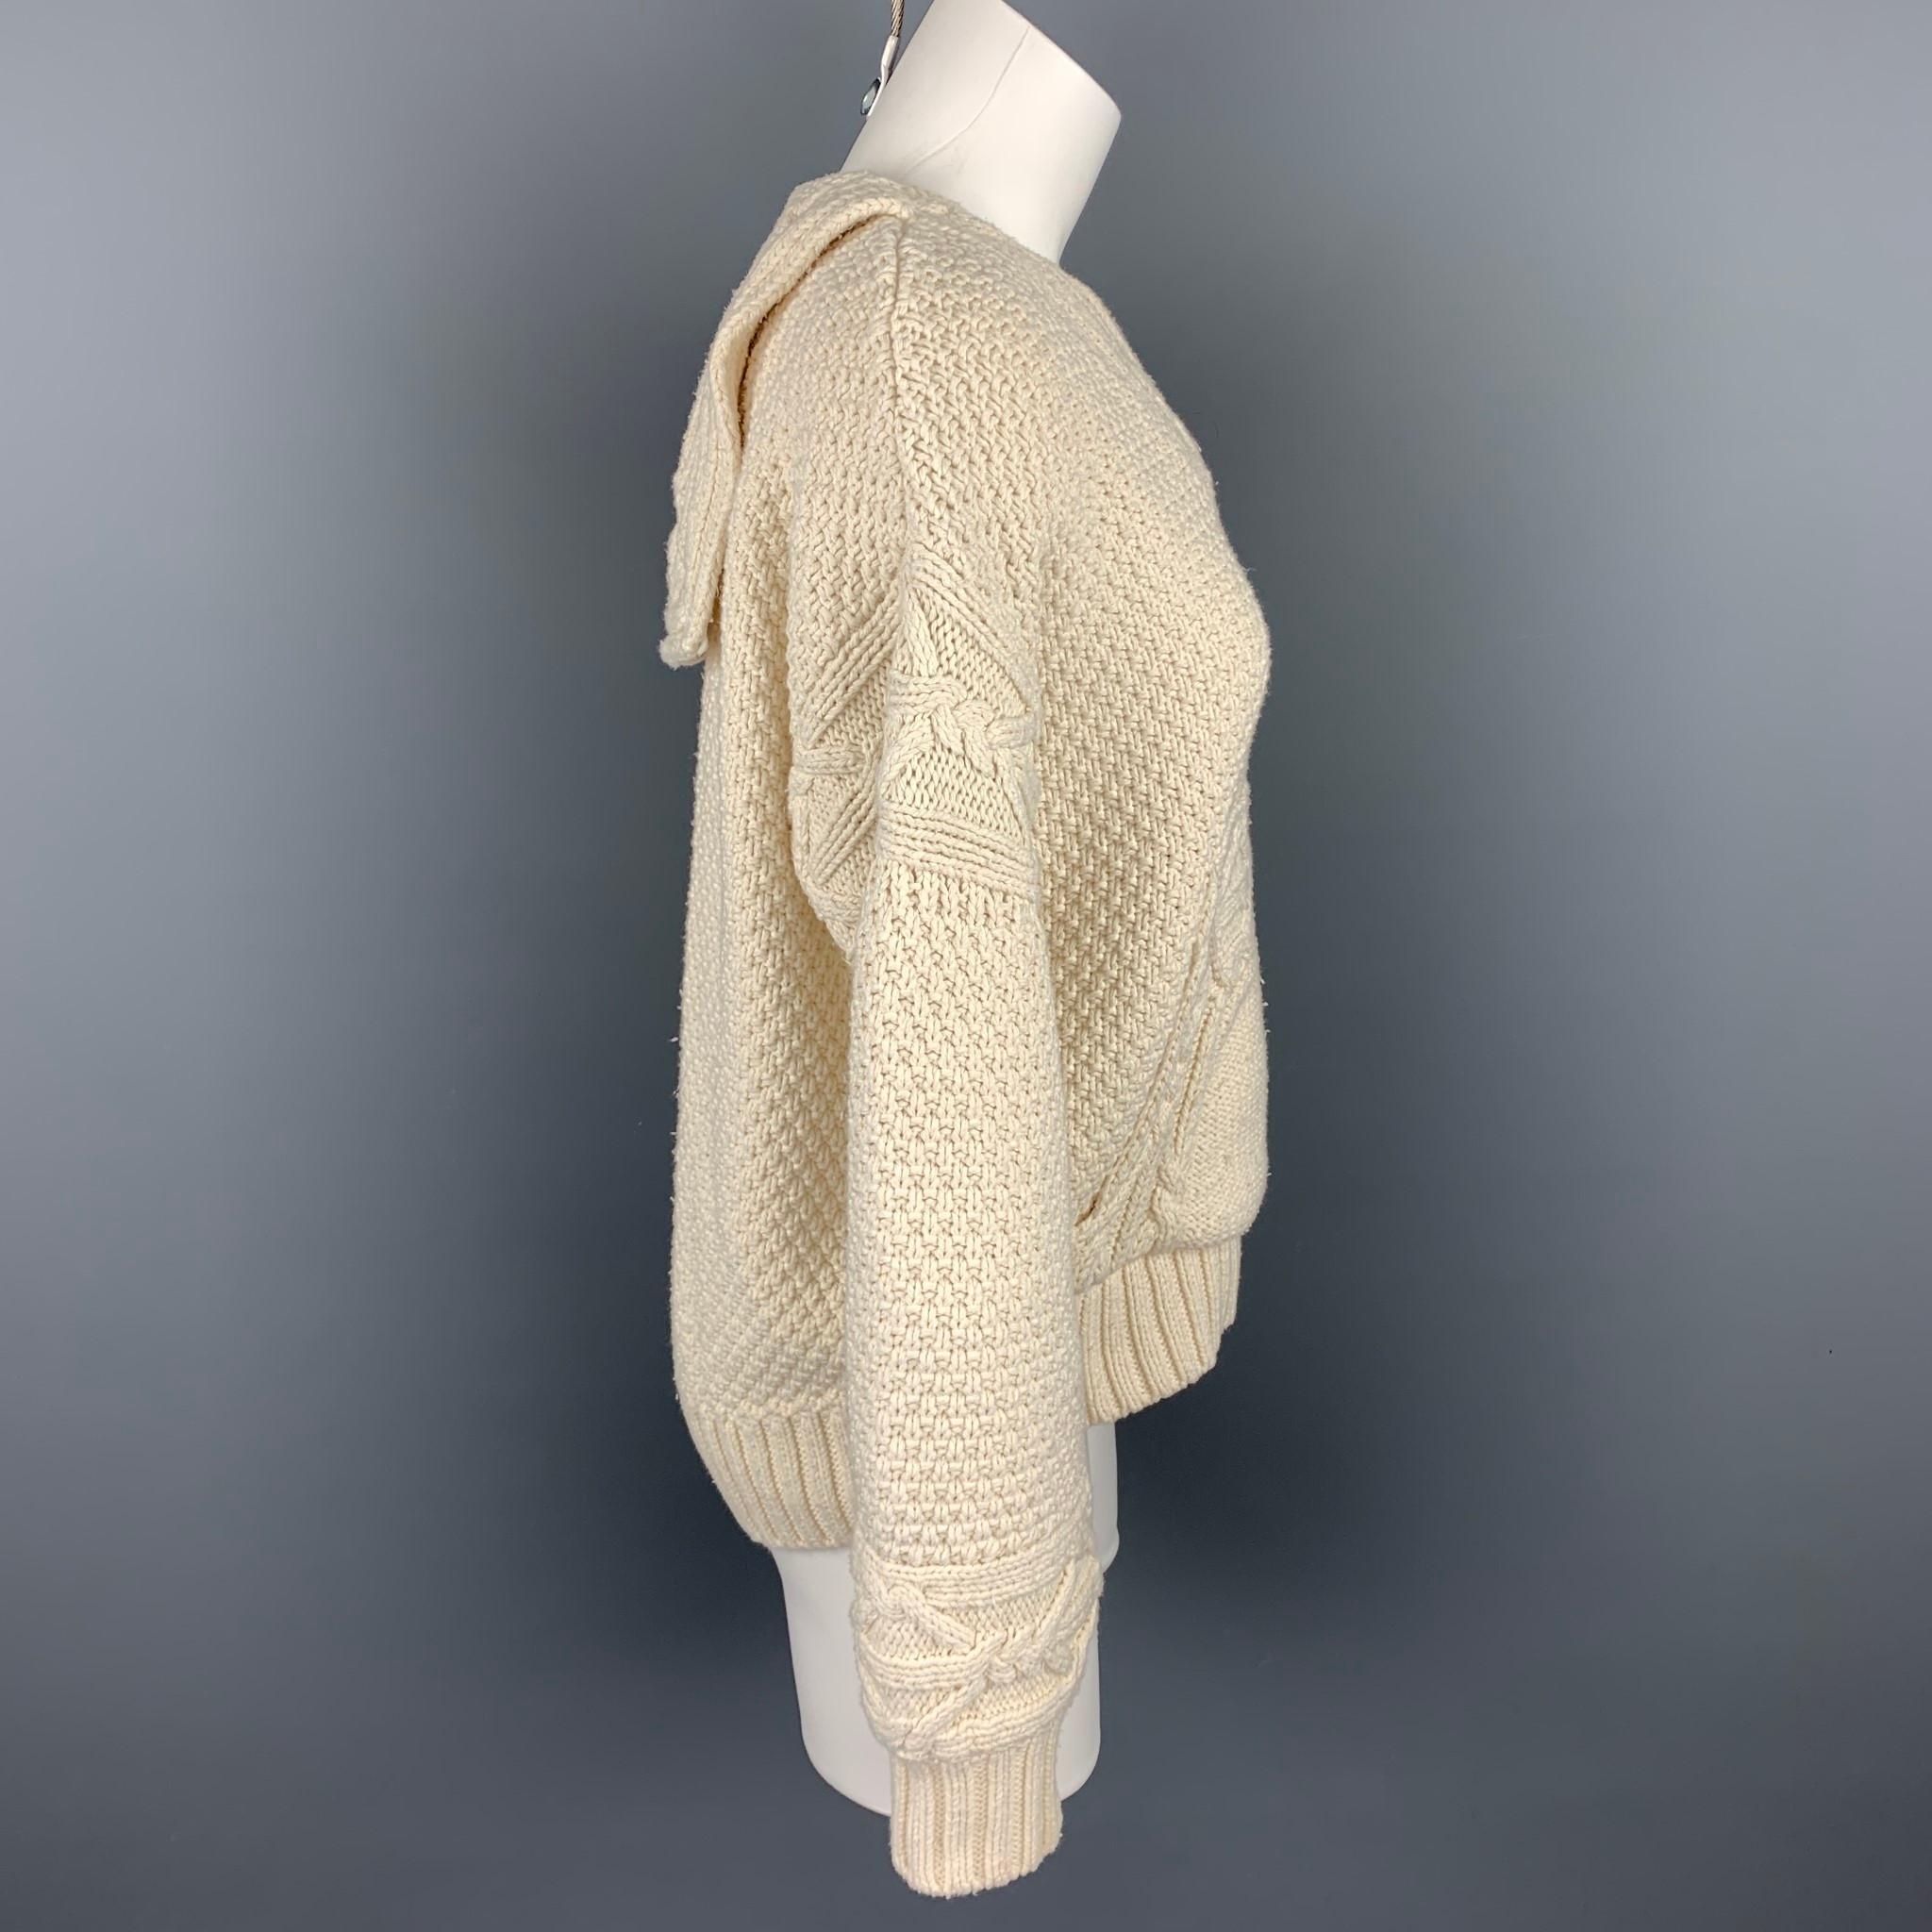 POLO by RALPH LAUREN sweater comes in a cream knitted cotton / polyester featuring a oversized fit, back flap collar, front pocket, and a v-neck.

Good Pre-Owned Condition.
Marked: S

Measurements:

Shoulder: 22 in.
Bust: 42 in.
Sleeve: 22